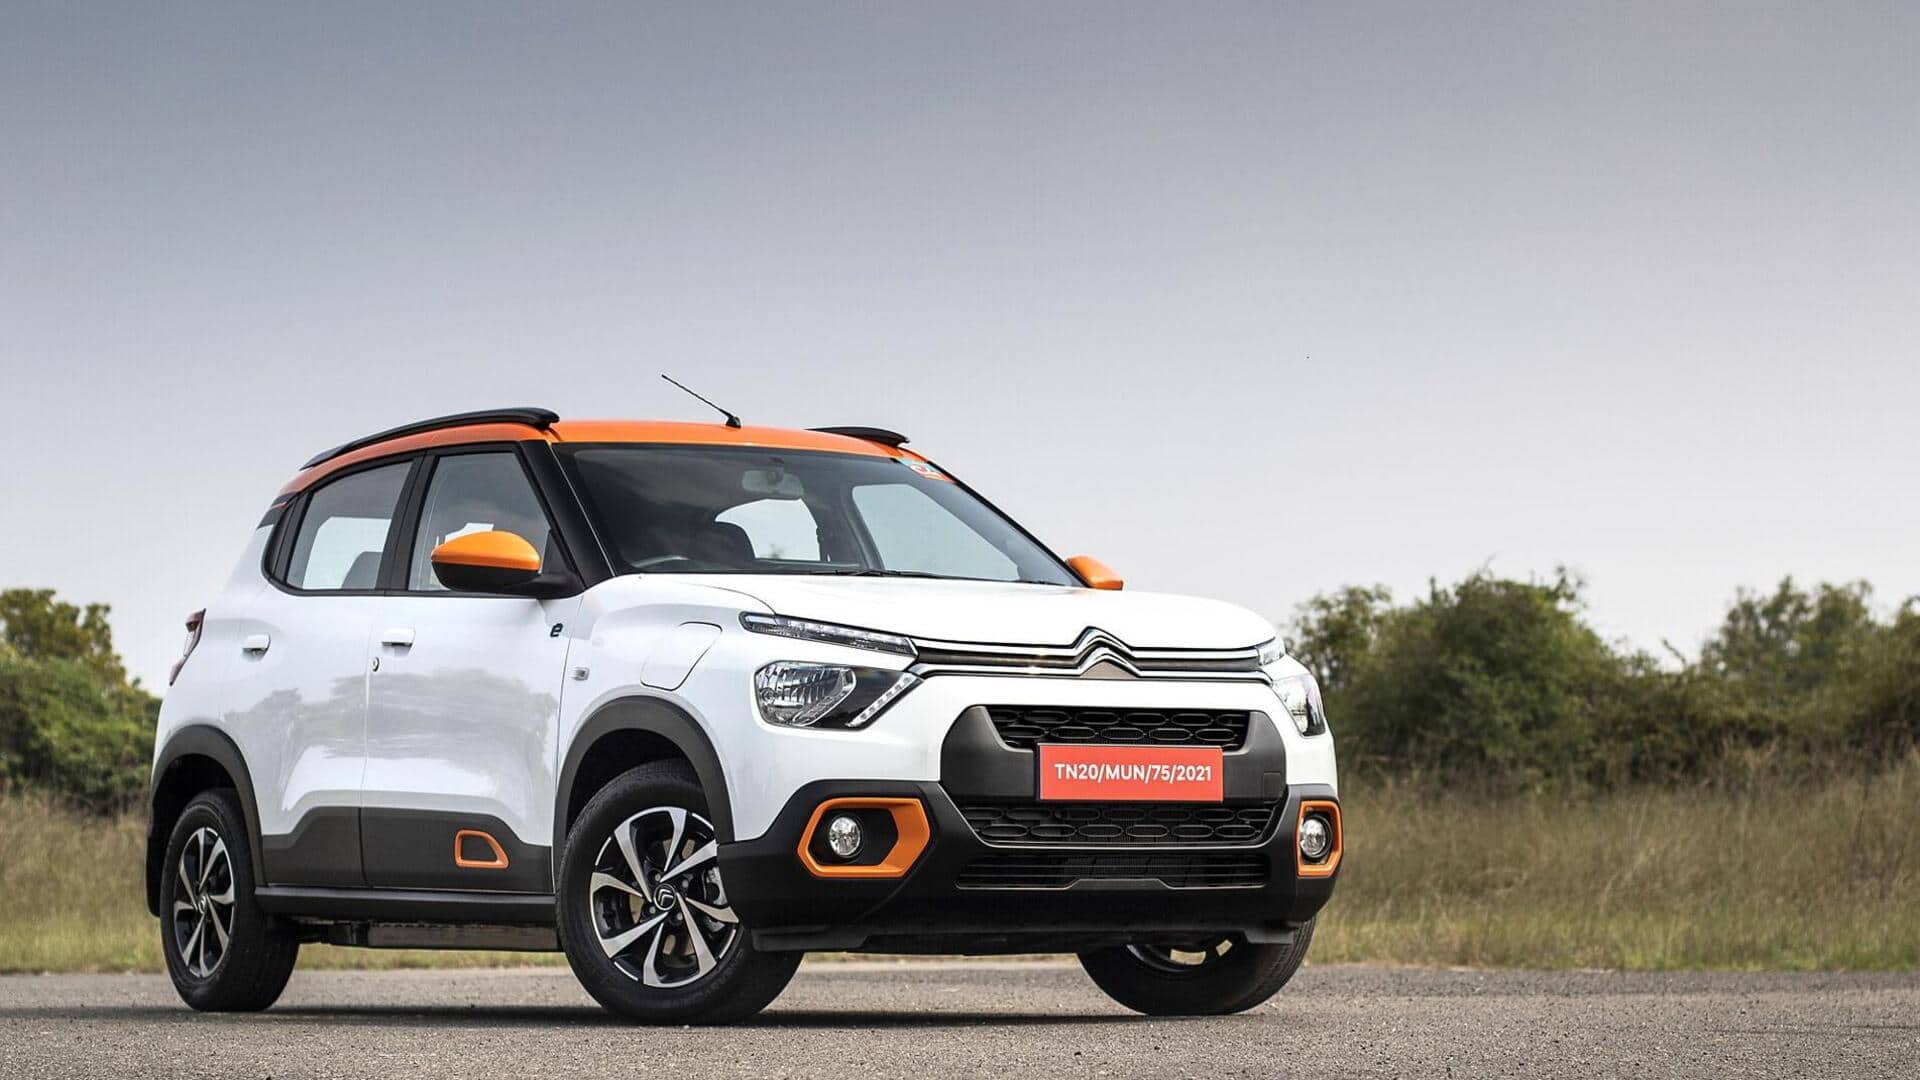 Citroen eC3 becomes costlier this November: Check new prices